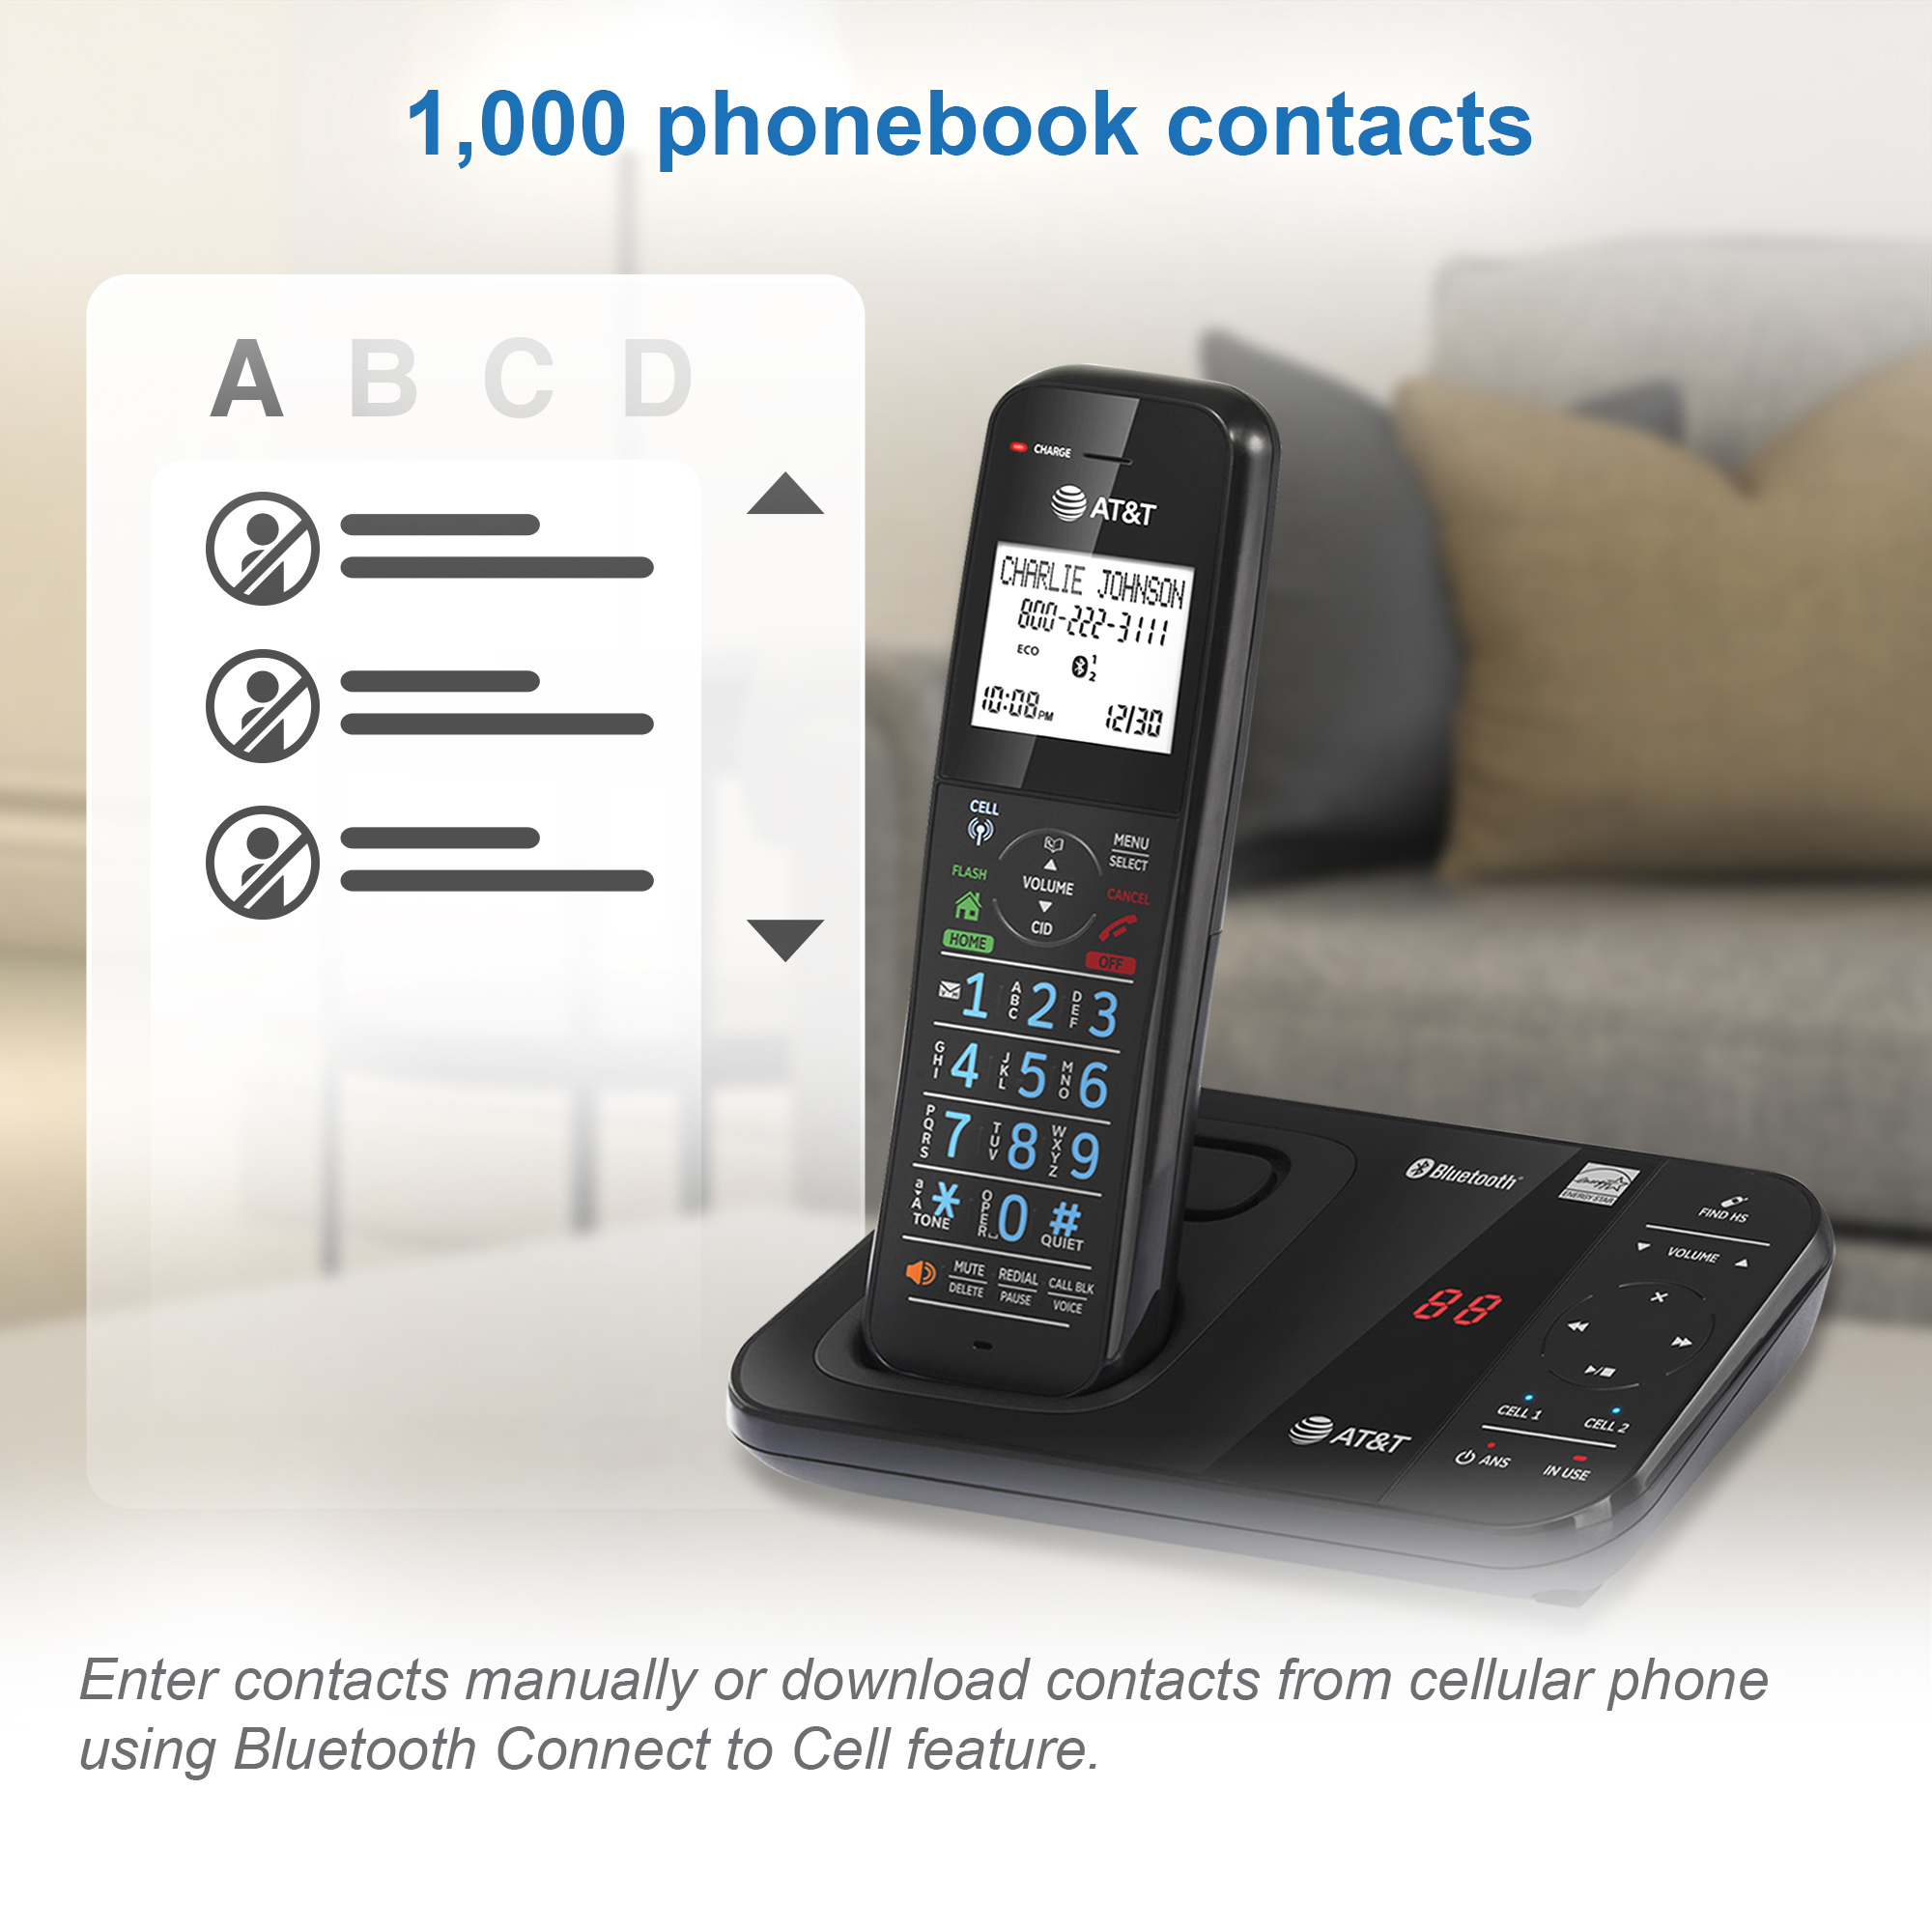 3-Handset Expandable Antibacterial Plastic Cordless Phone with Bluetooth Connect to Cell, Smart Call Blocker and Answering System - view 13